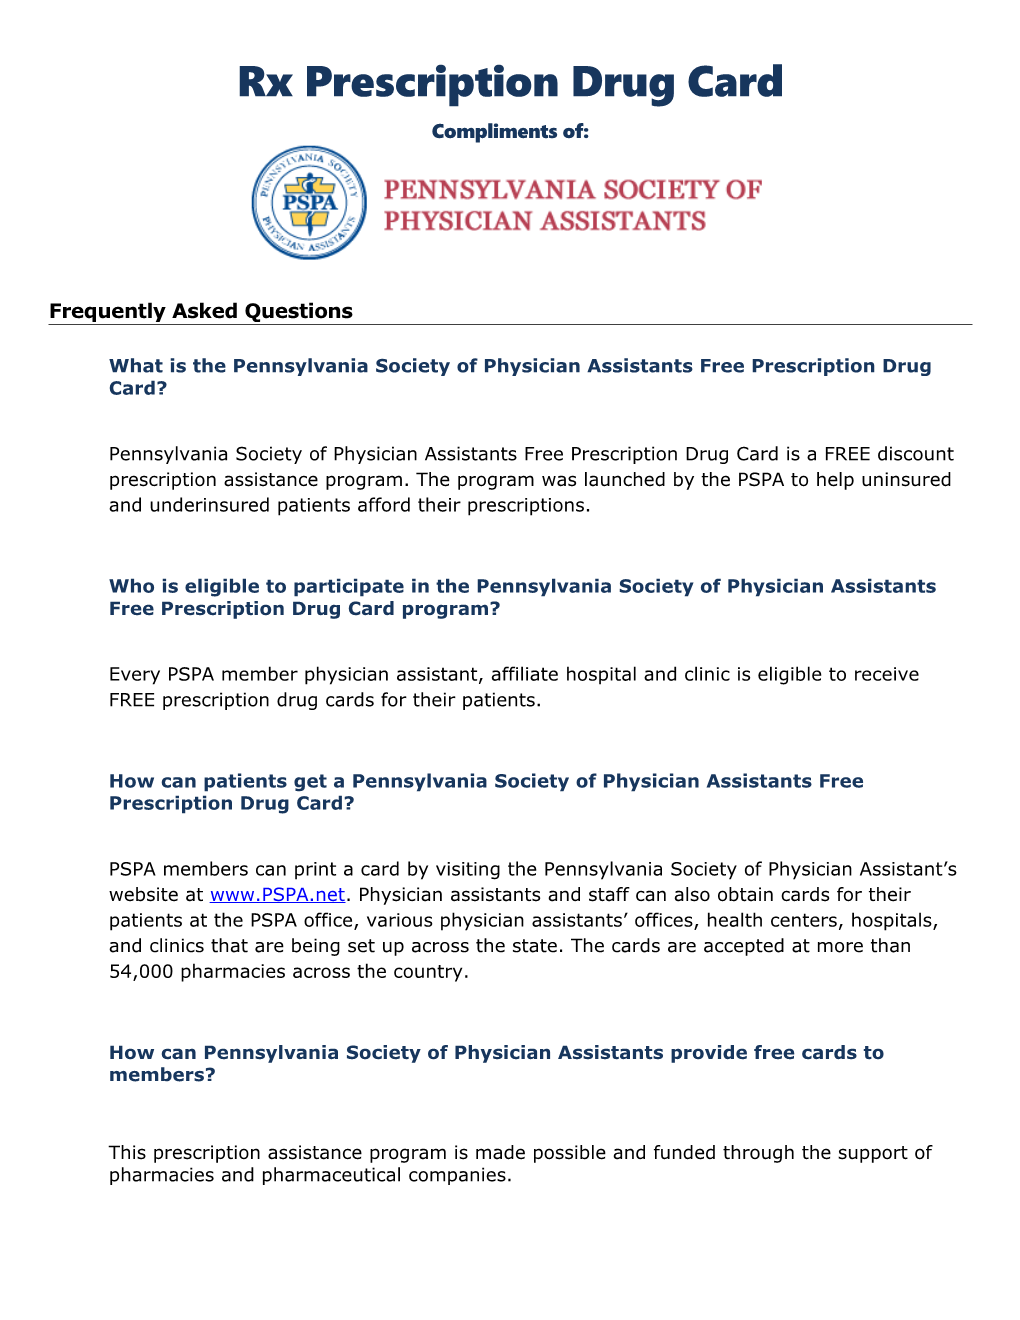 What Is the Pennsylvania Society of Physician Assistants Free Prescription Drug Card?